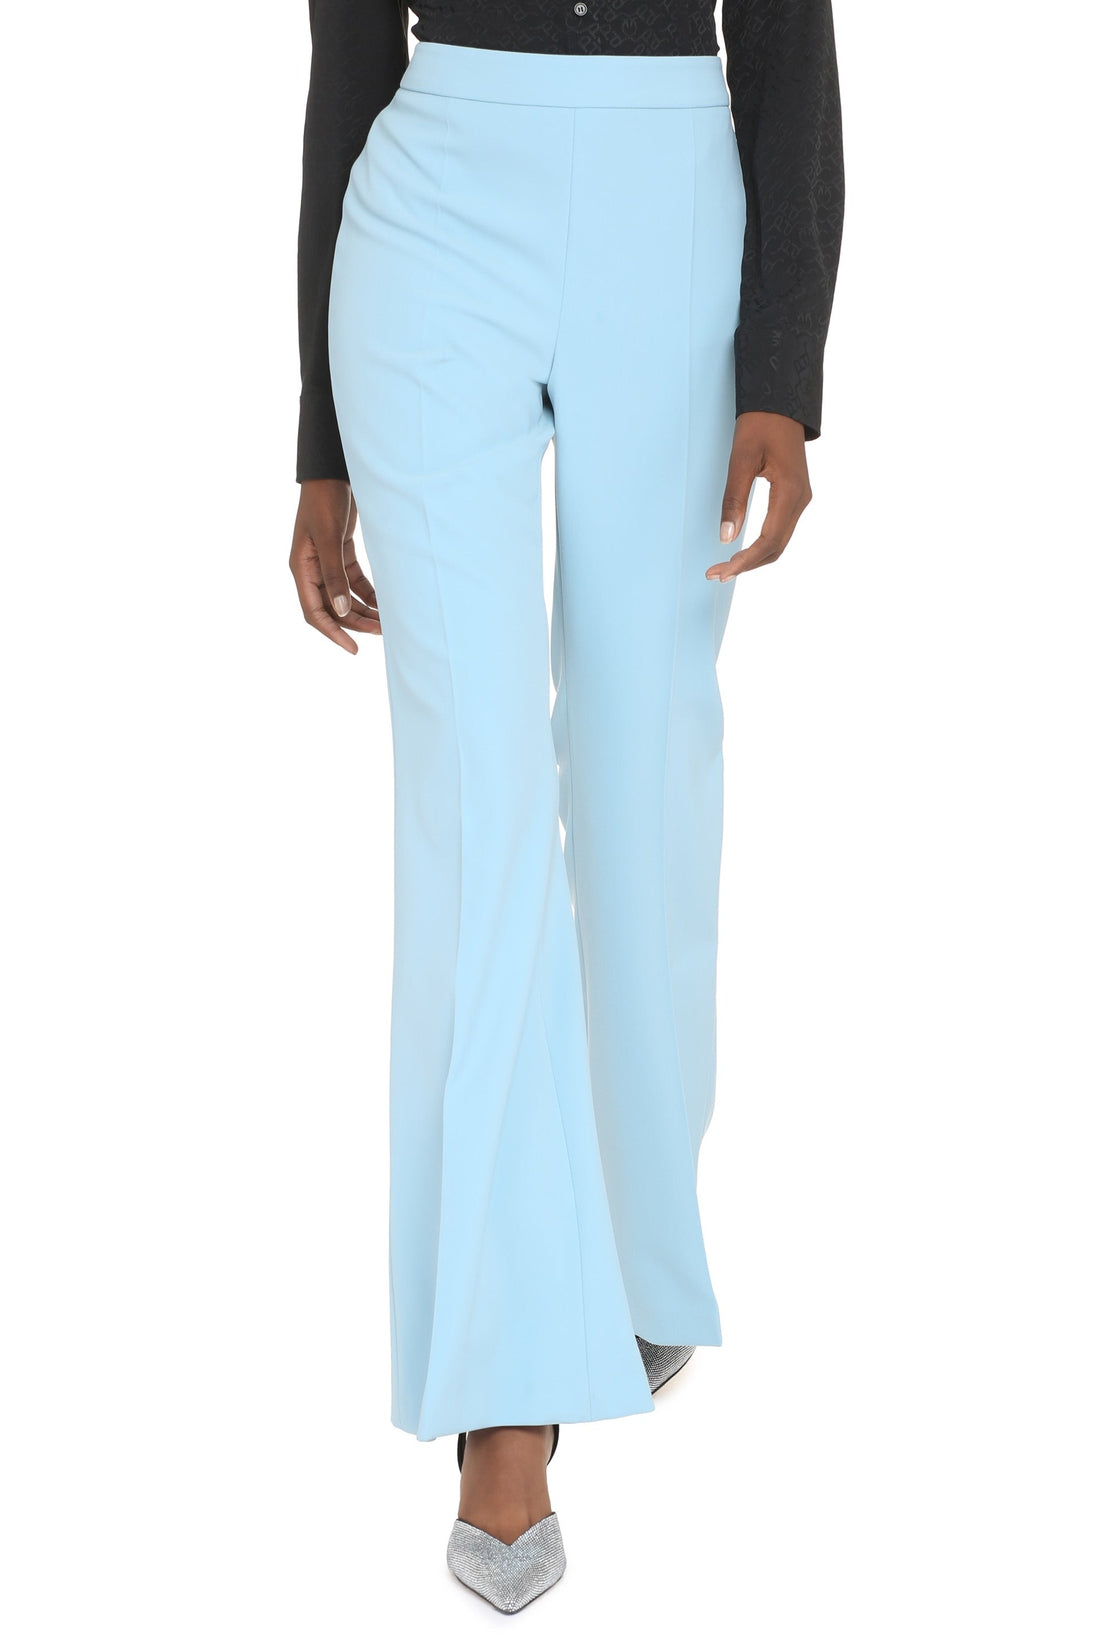 Boutique Moschino-OUTLET-SALE-Flared trousers-ARCHIVIST